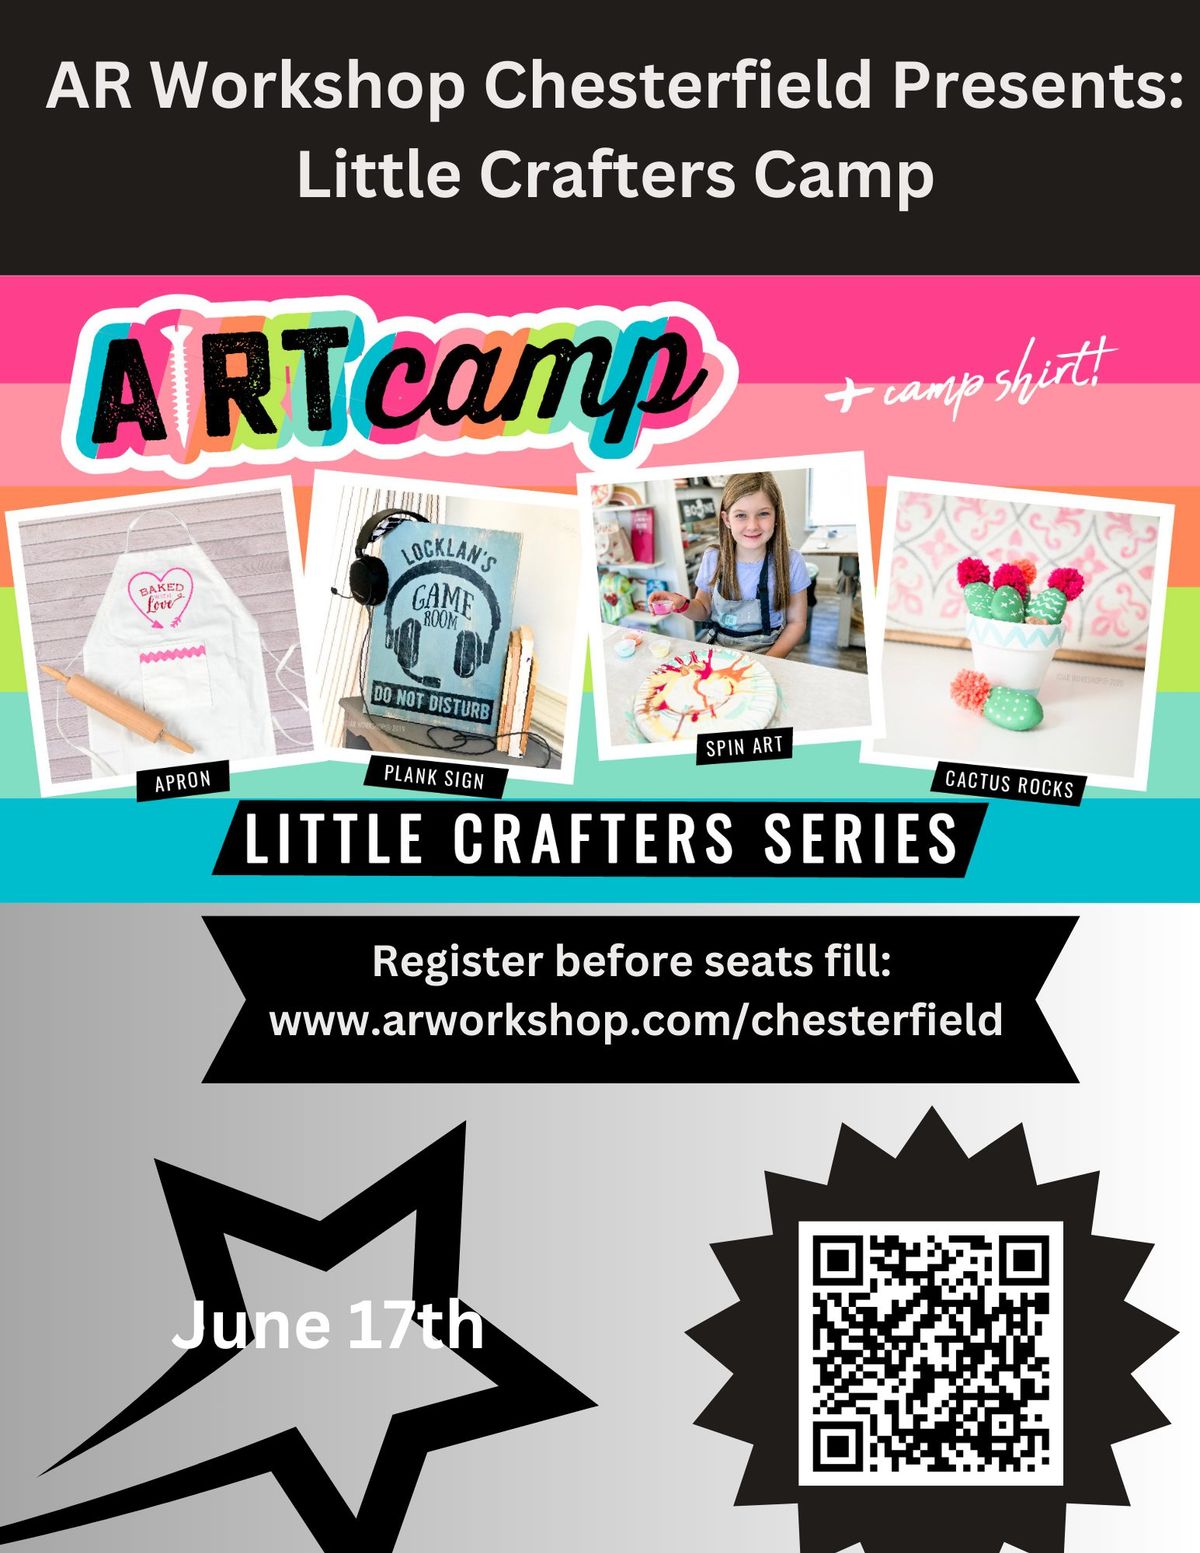 Little Crafters Camp